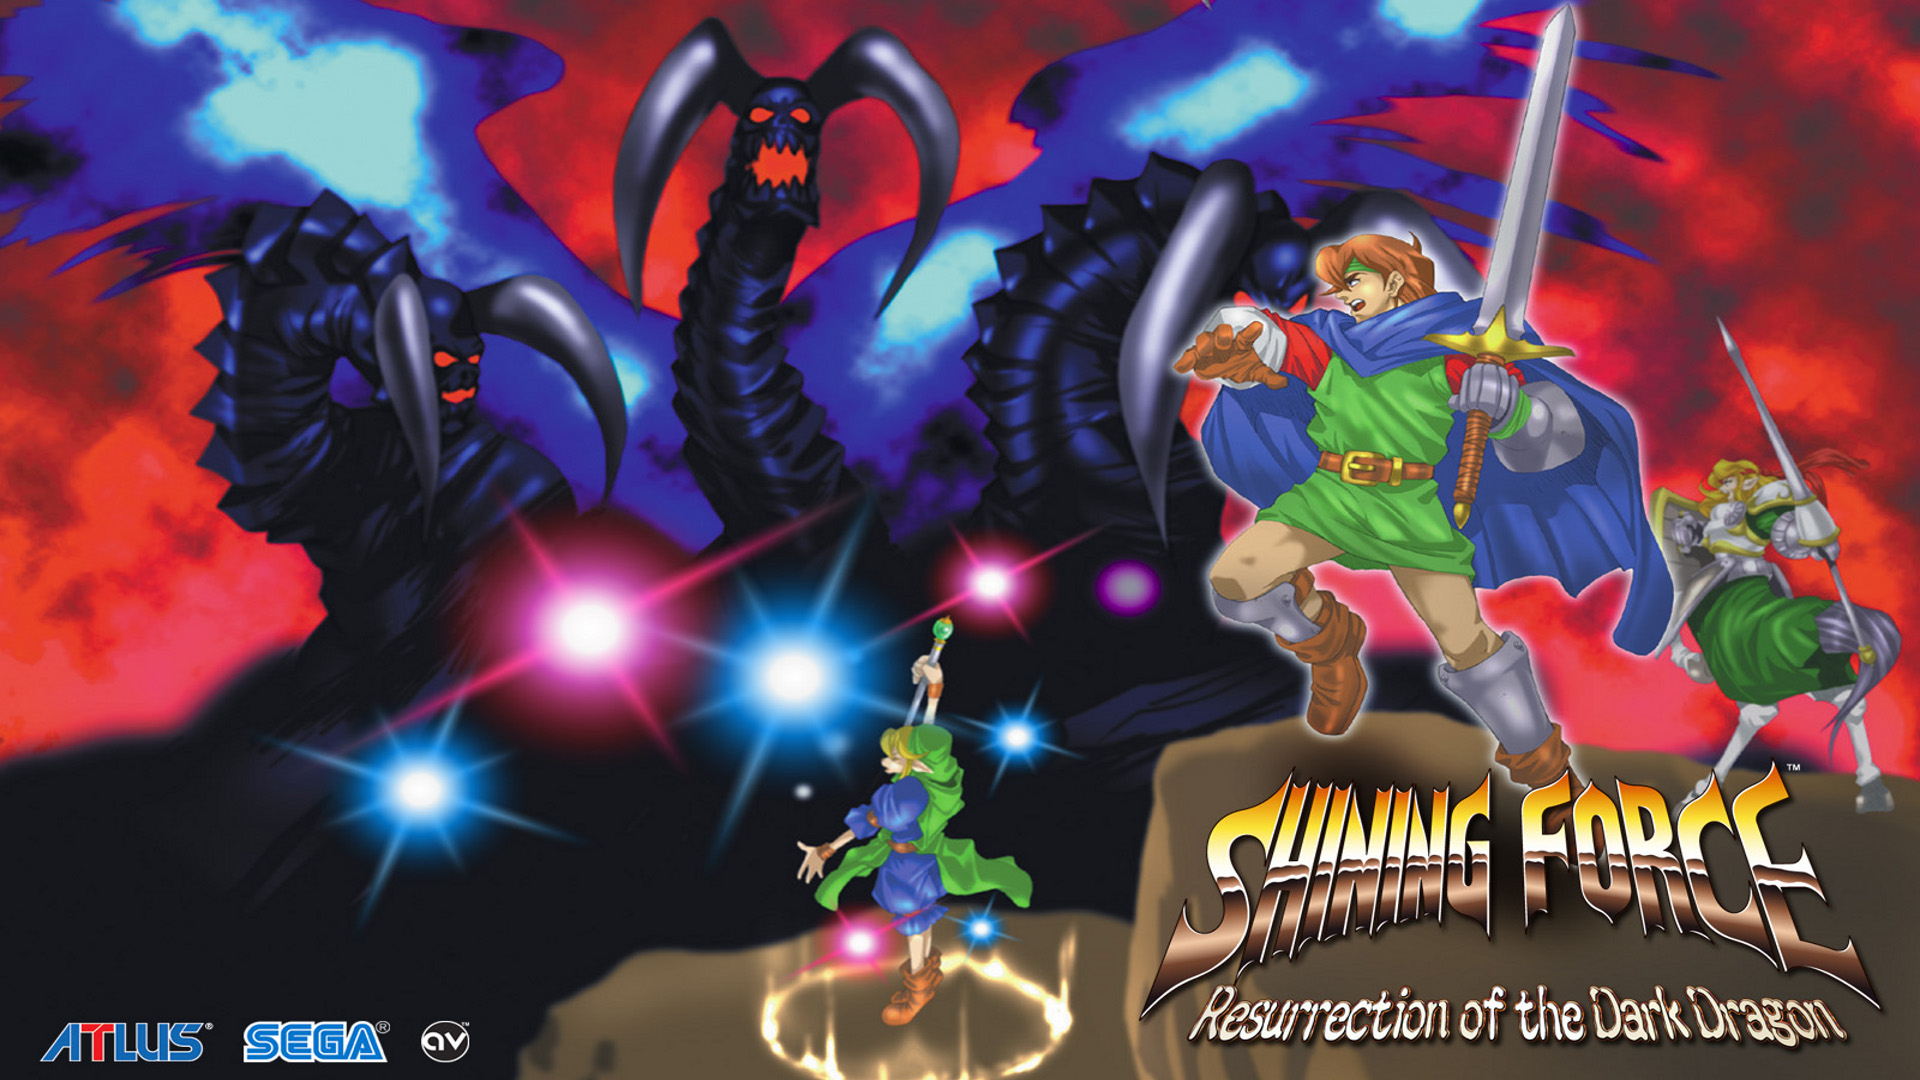 Video Game Shining Force: Resurrection of the Dark Dragon HD Wallpaper | Background Image